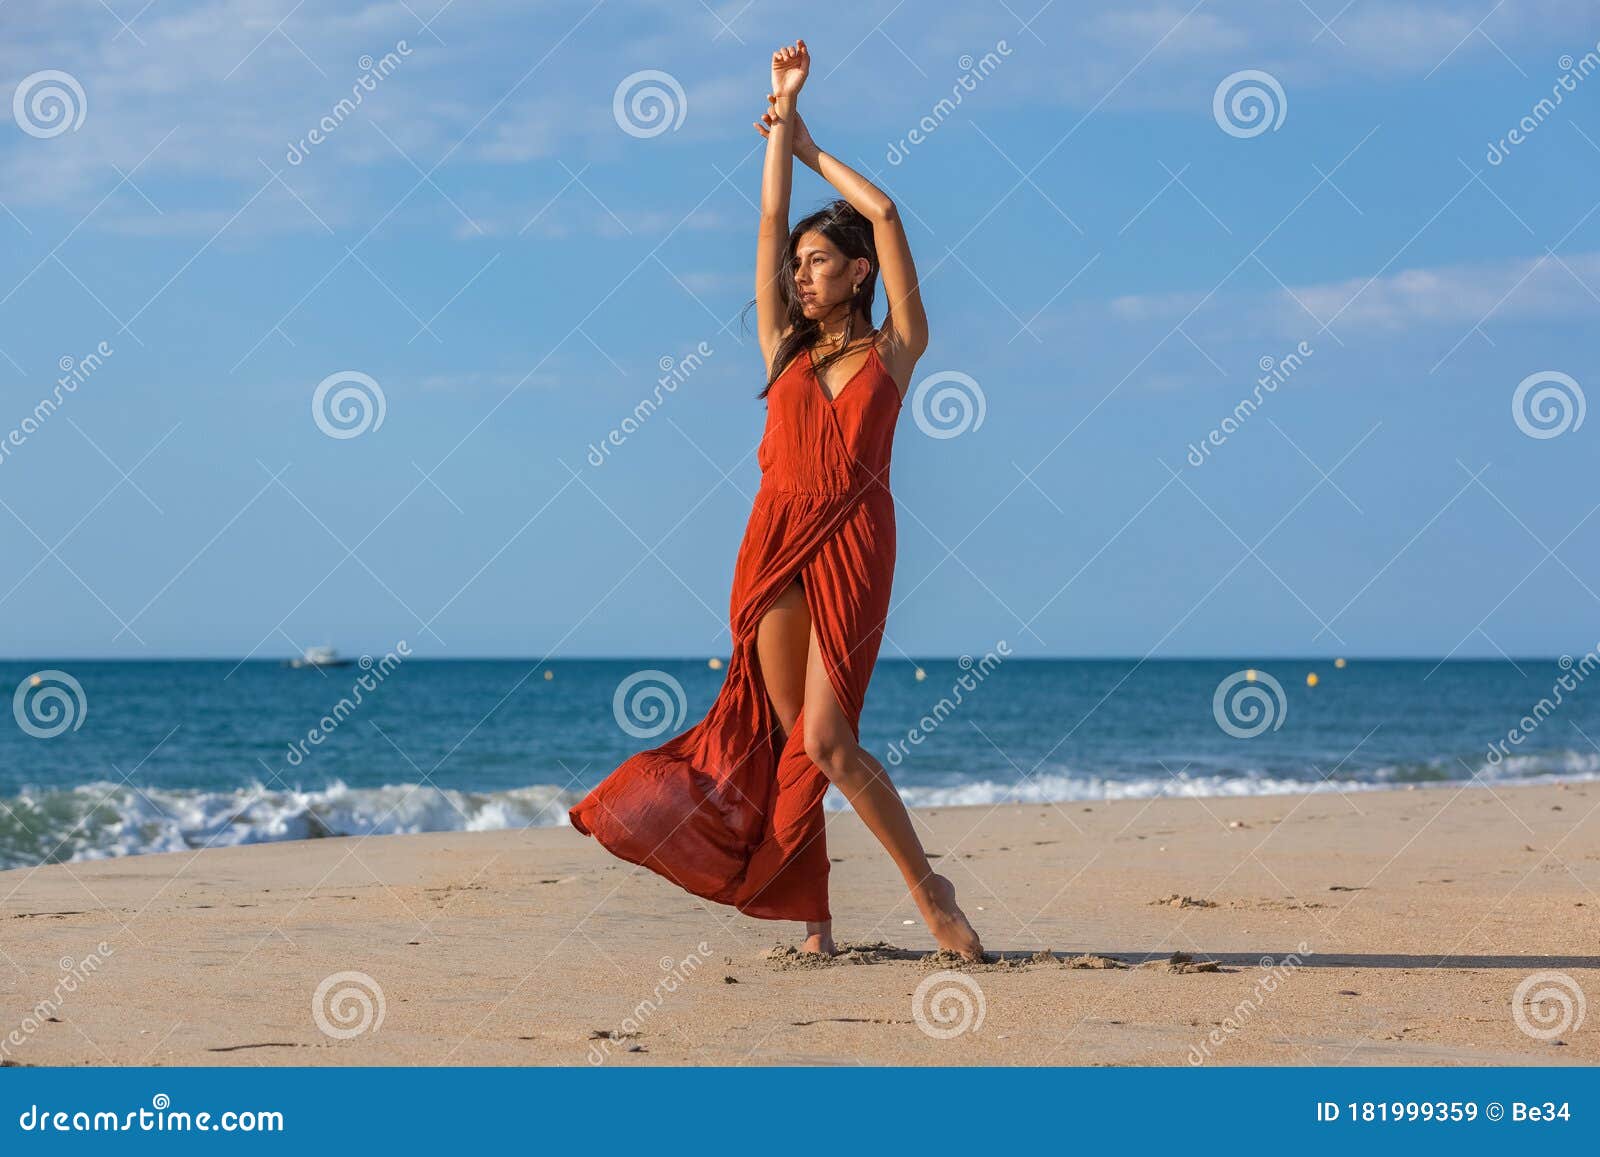 YOUNG WOMAN on the SAND of the BEACH Stock Image - Image of calm, breeze:  181999359